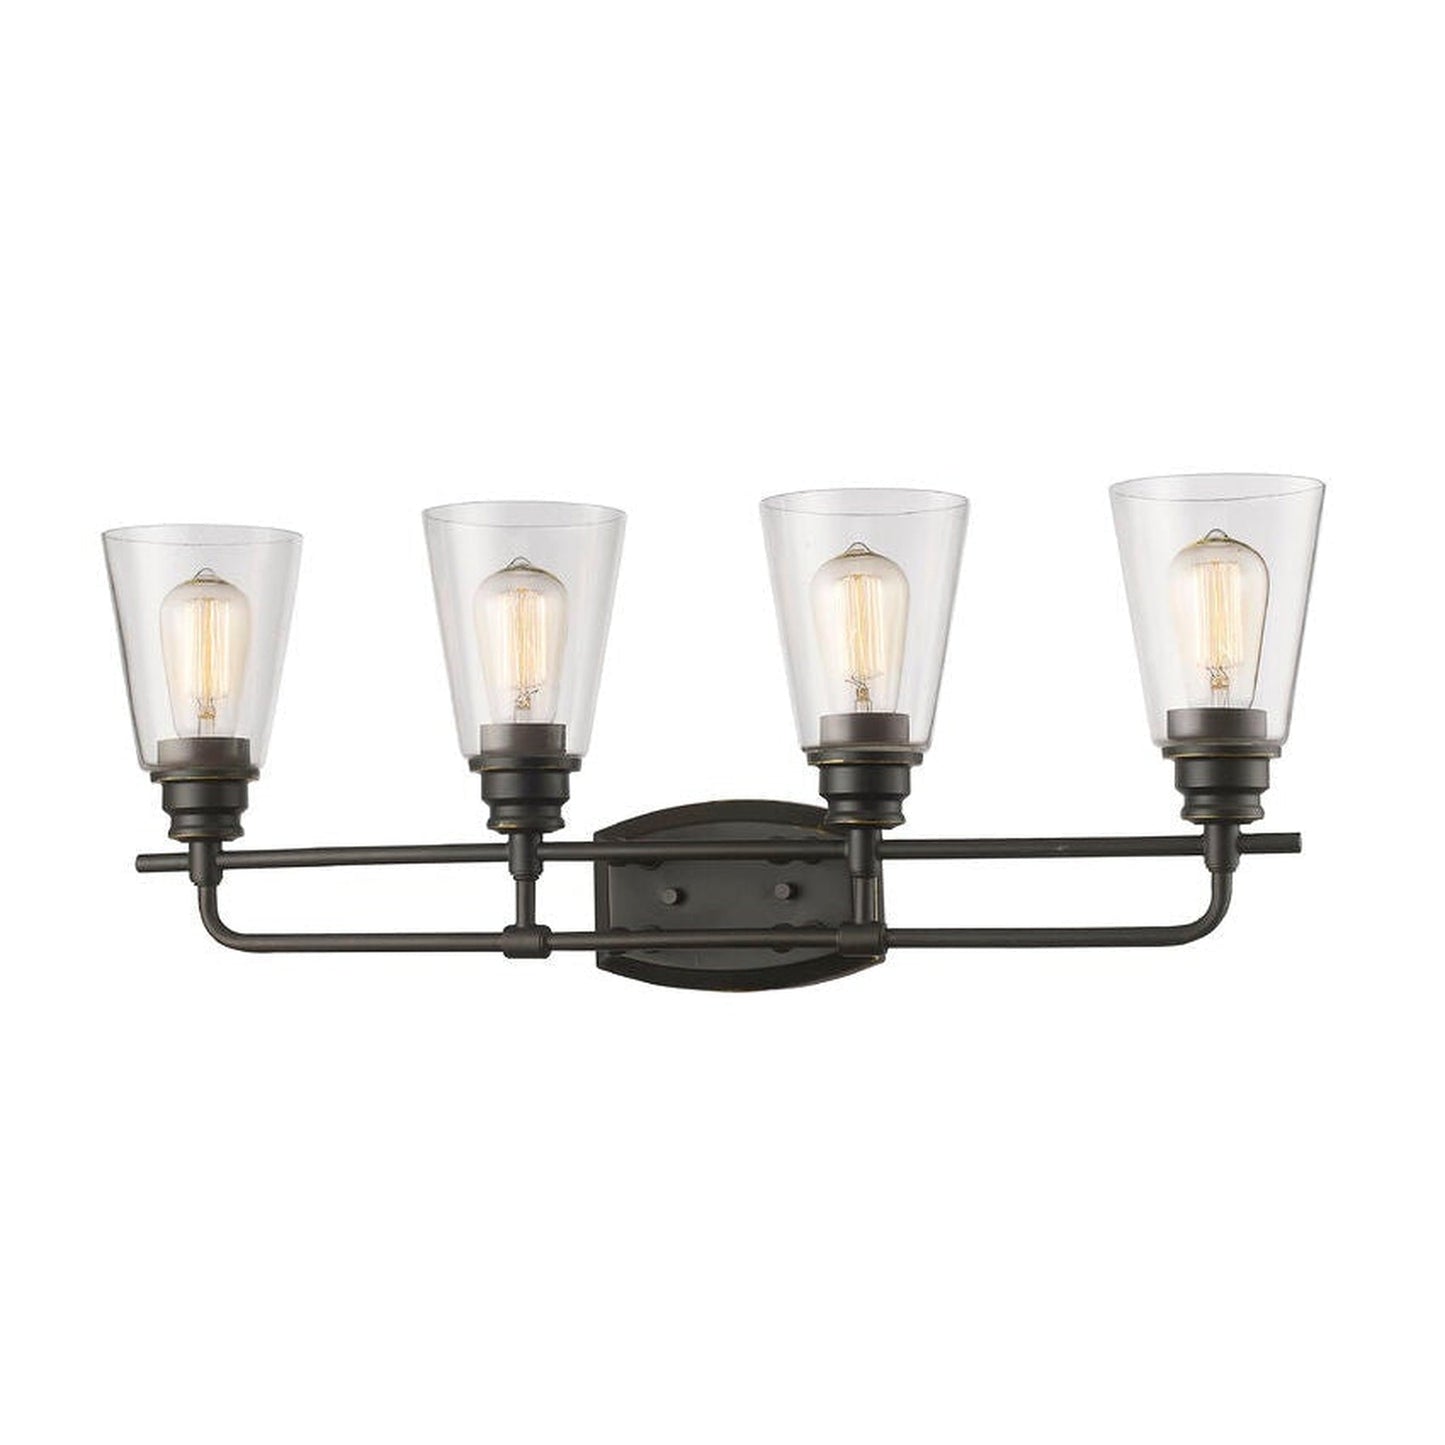 Z-Lite Annora 29" 4-Light Olde Bronze Vanity Light With Clear Glass Shade